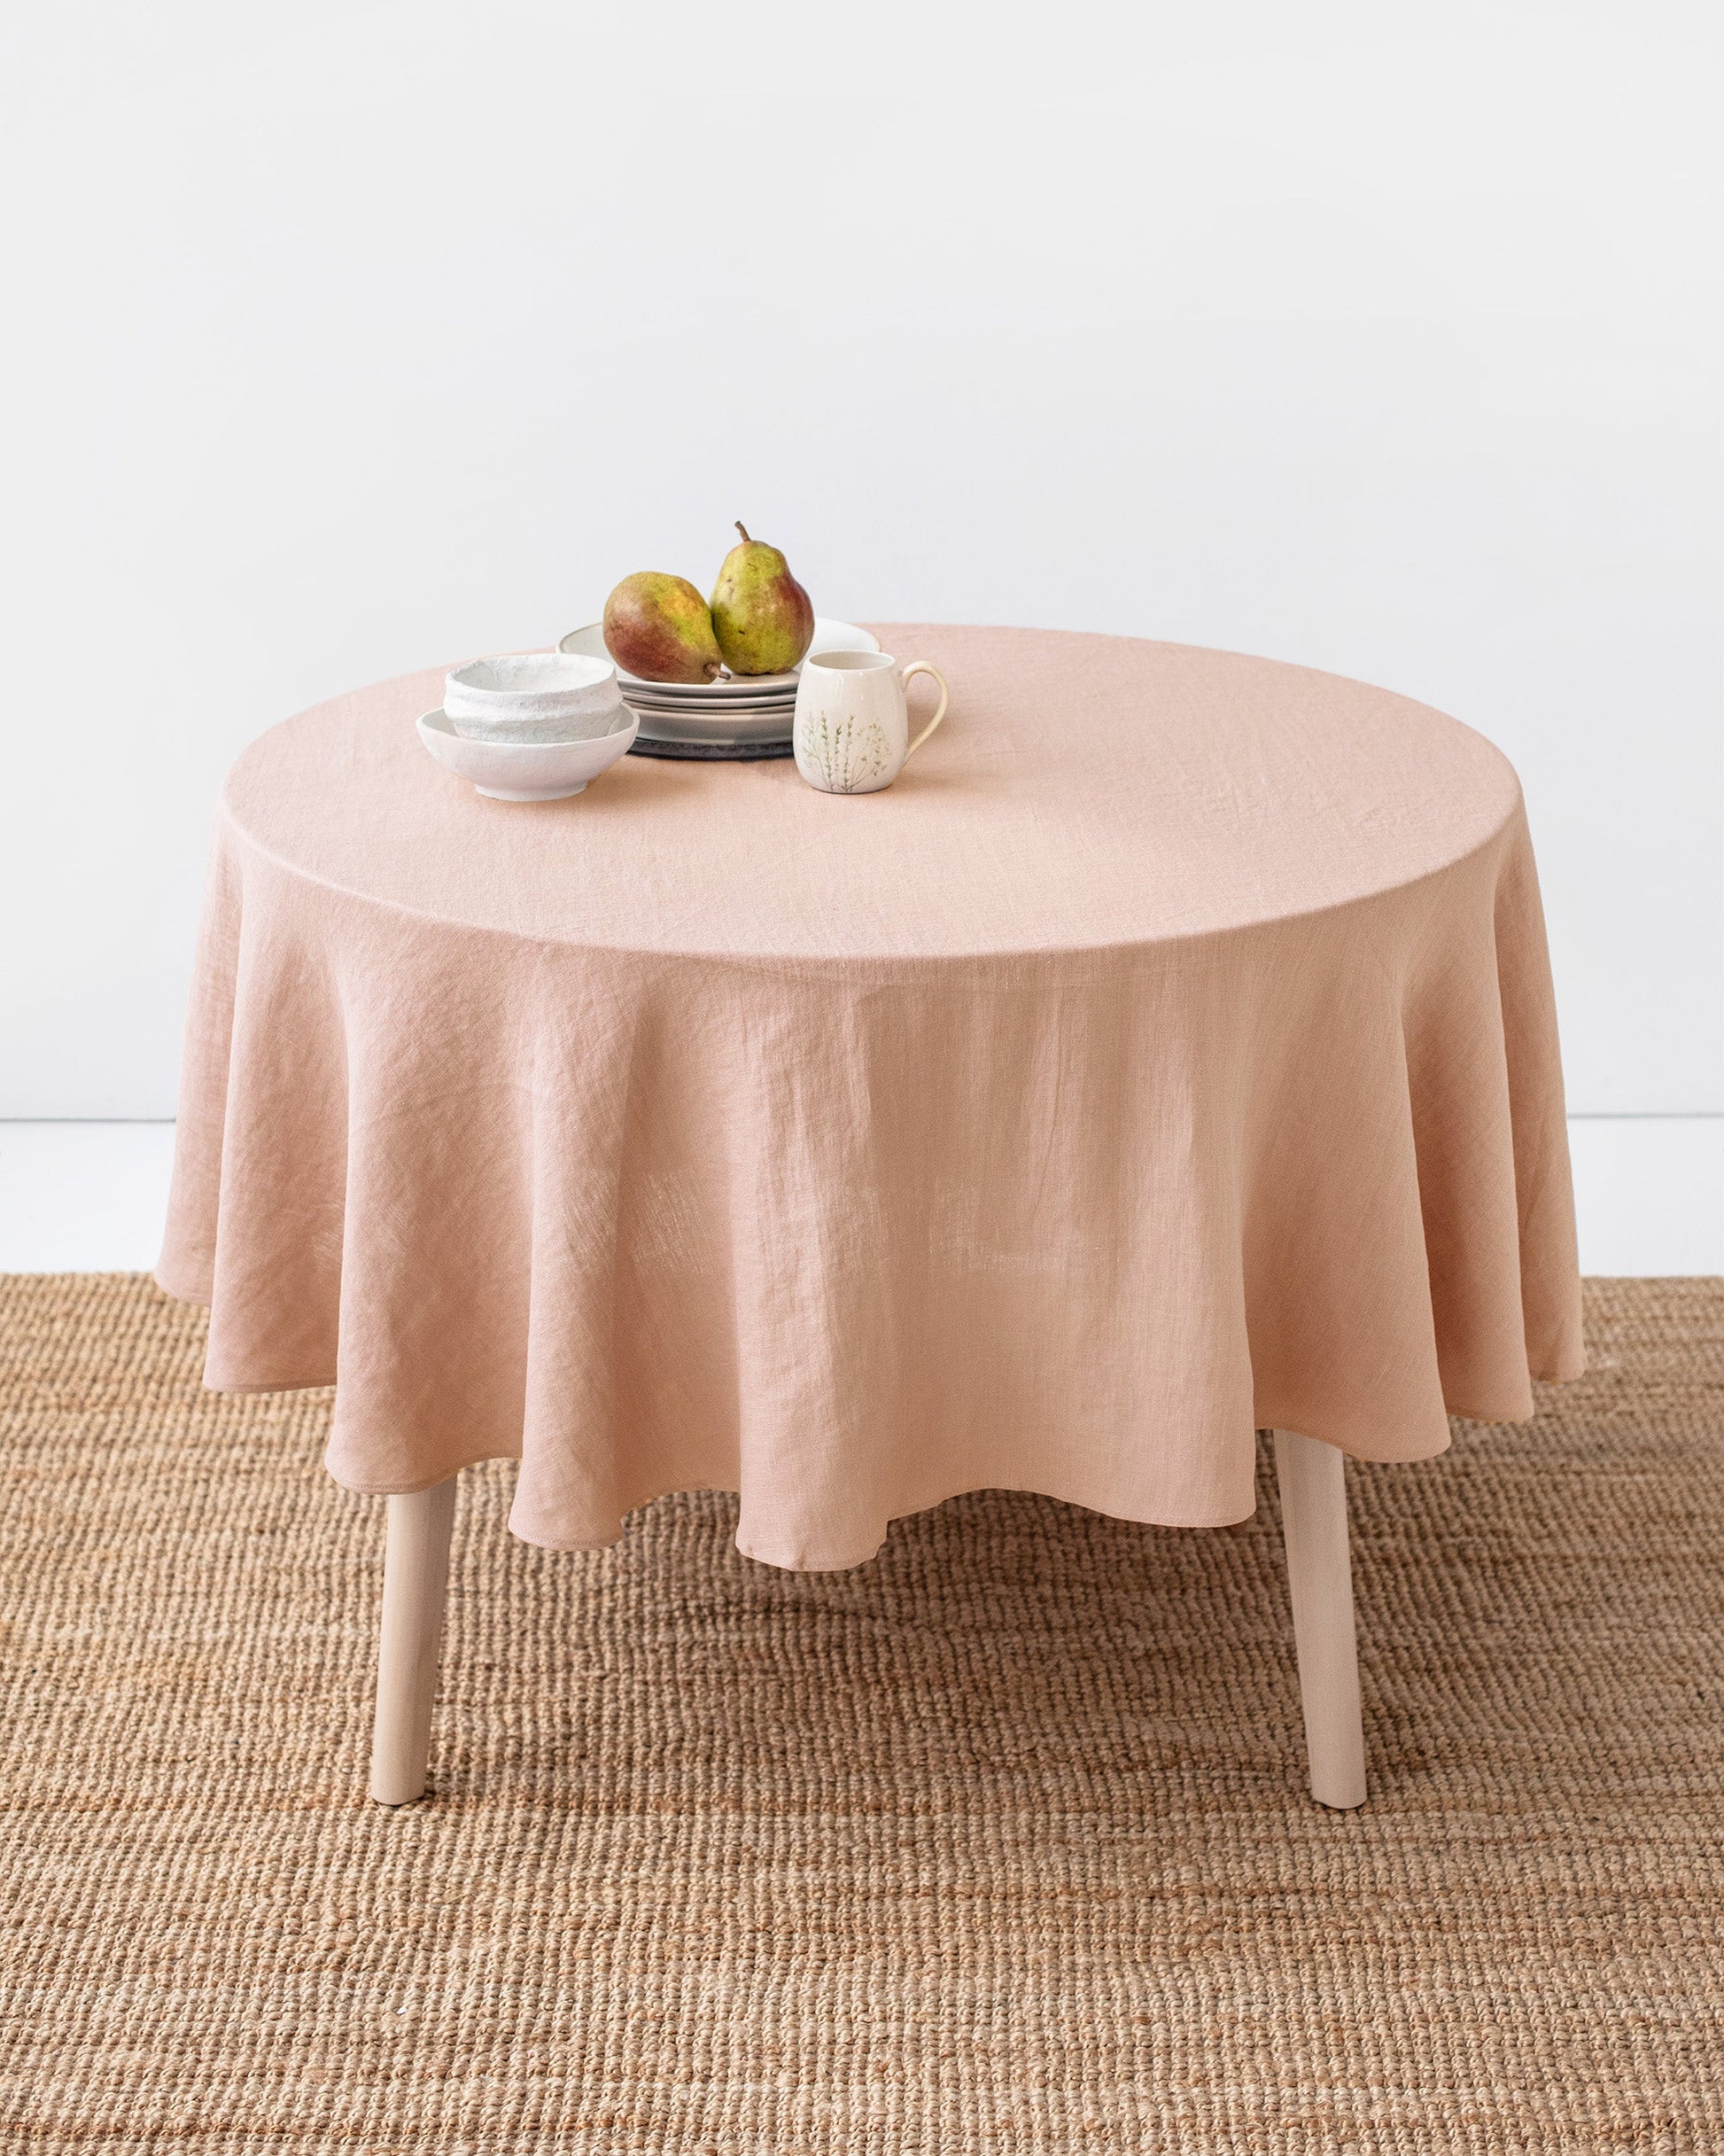 Custom size round linen tablecloth in Peach - MagicLinen